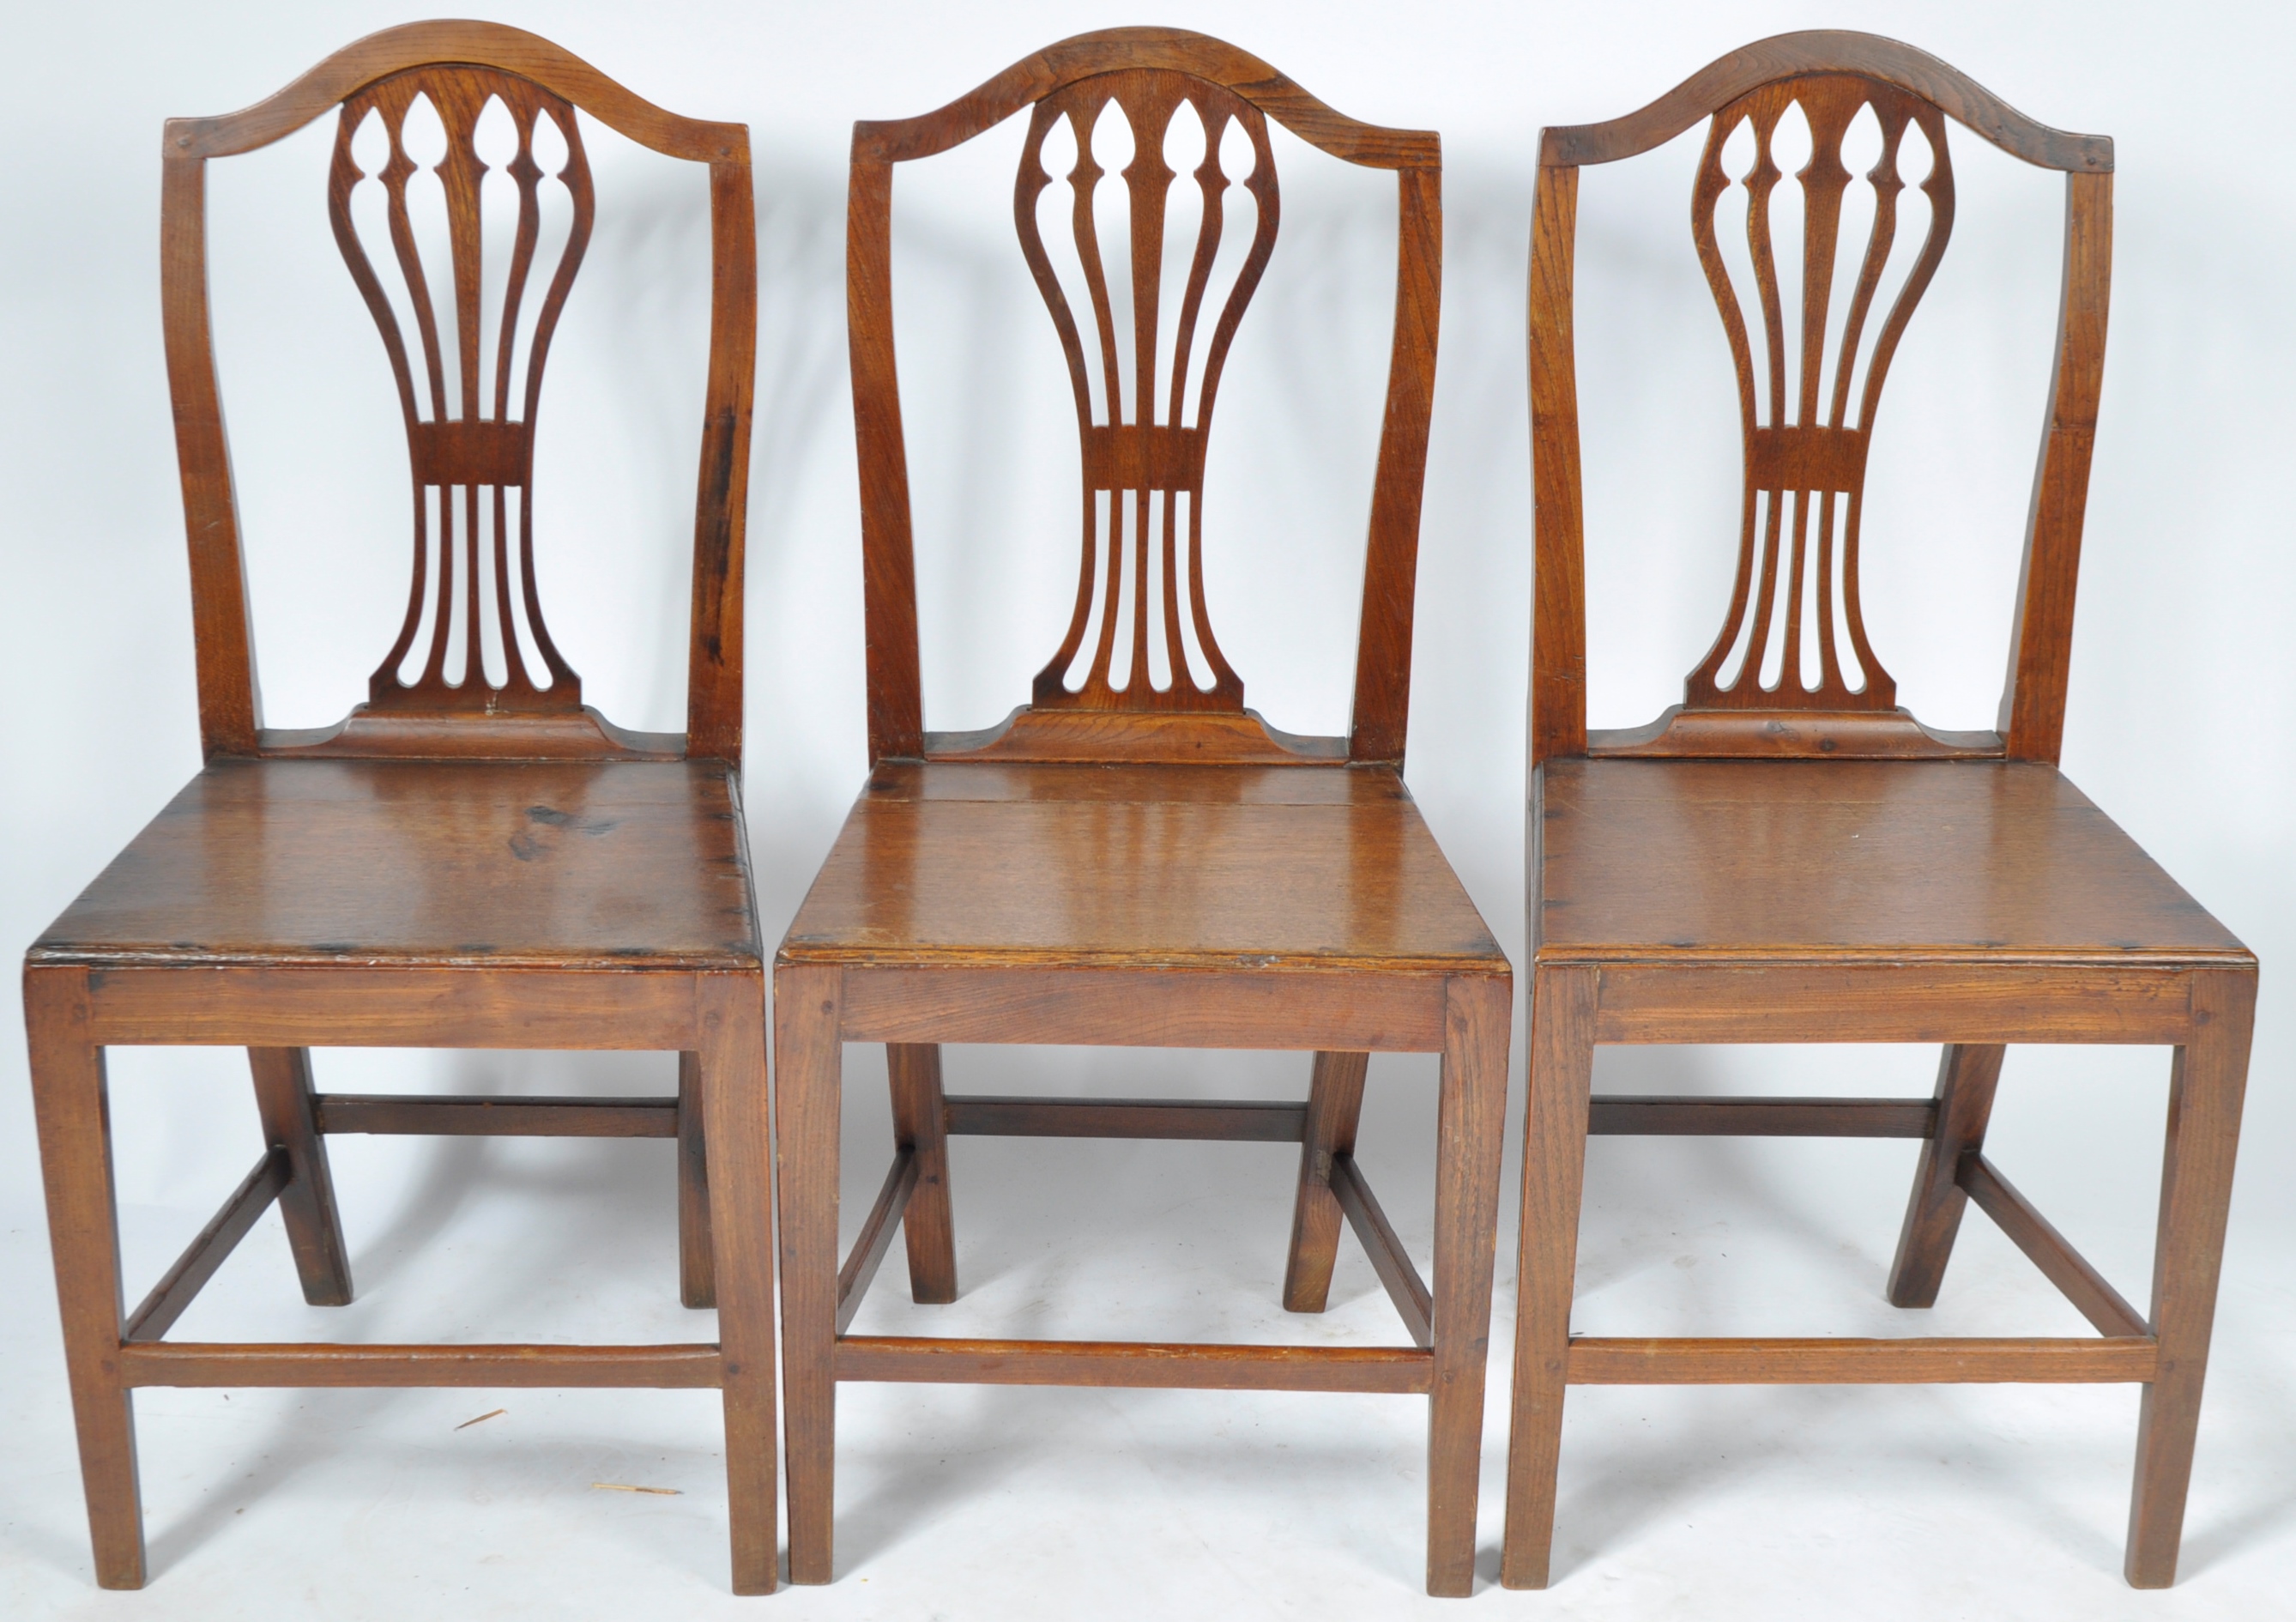 SET OF SIX 18TH CENTURY CHIPPENDALE STYLE OAK & ELM DINING CHAIRS - Image 2 of 11